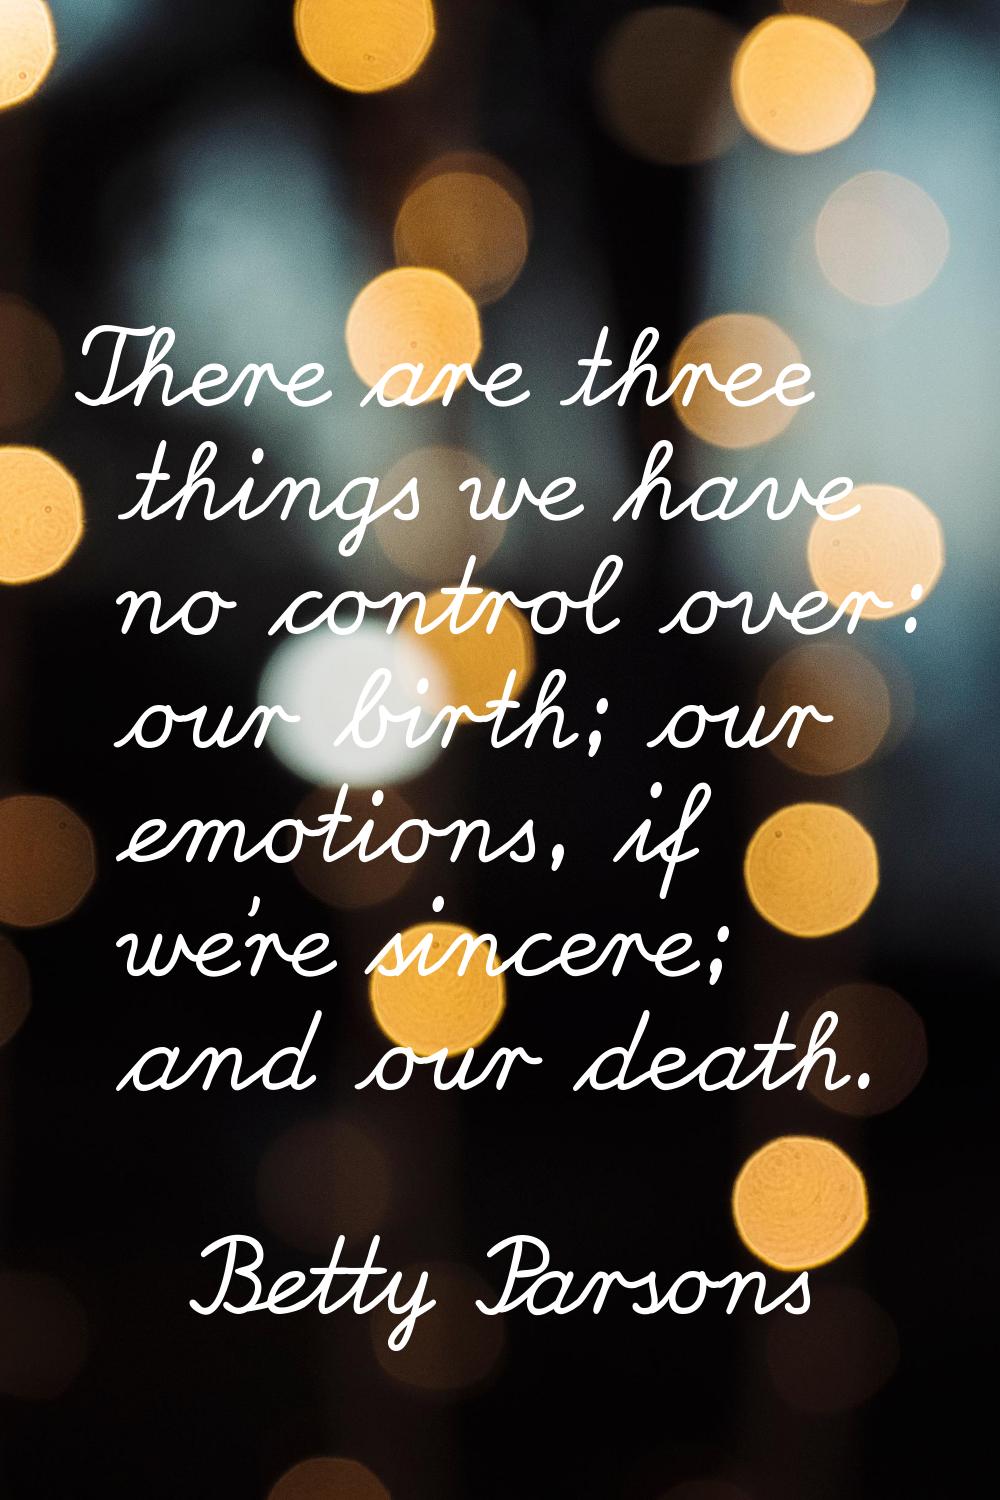 There are three things we have no control over: our birth; our emotions, if we're sincere; and our 